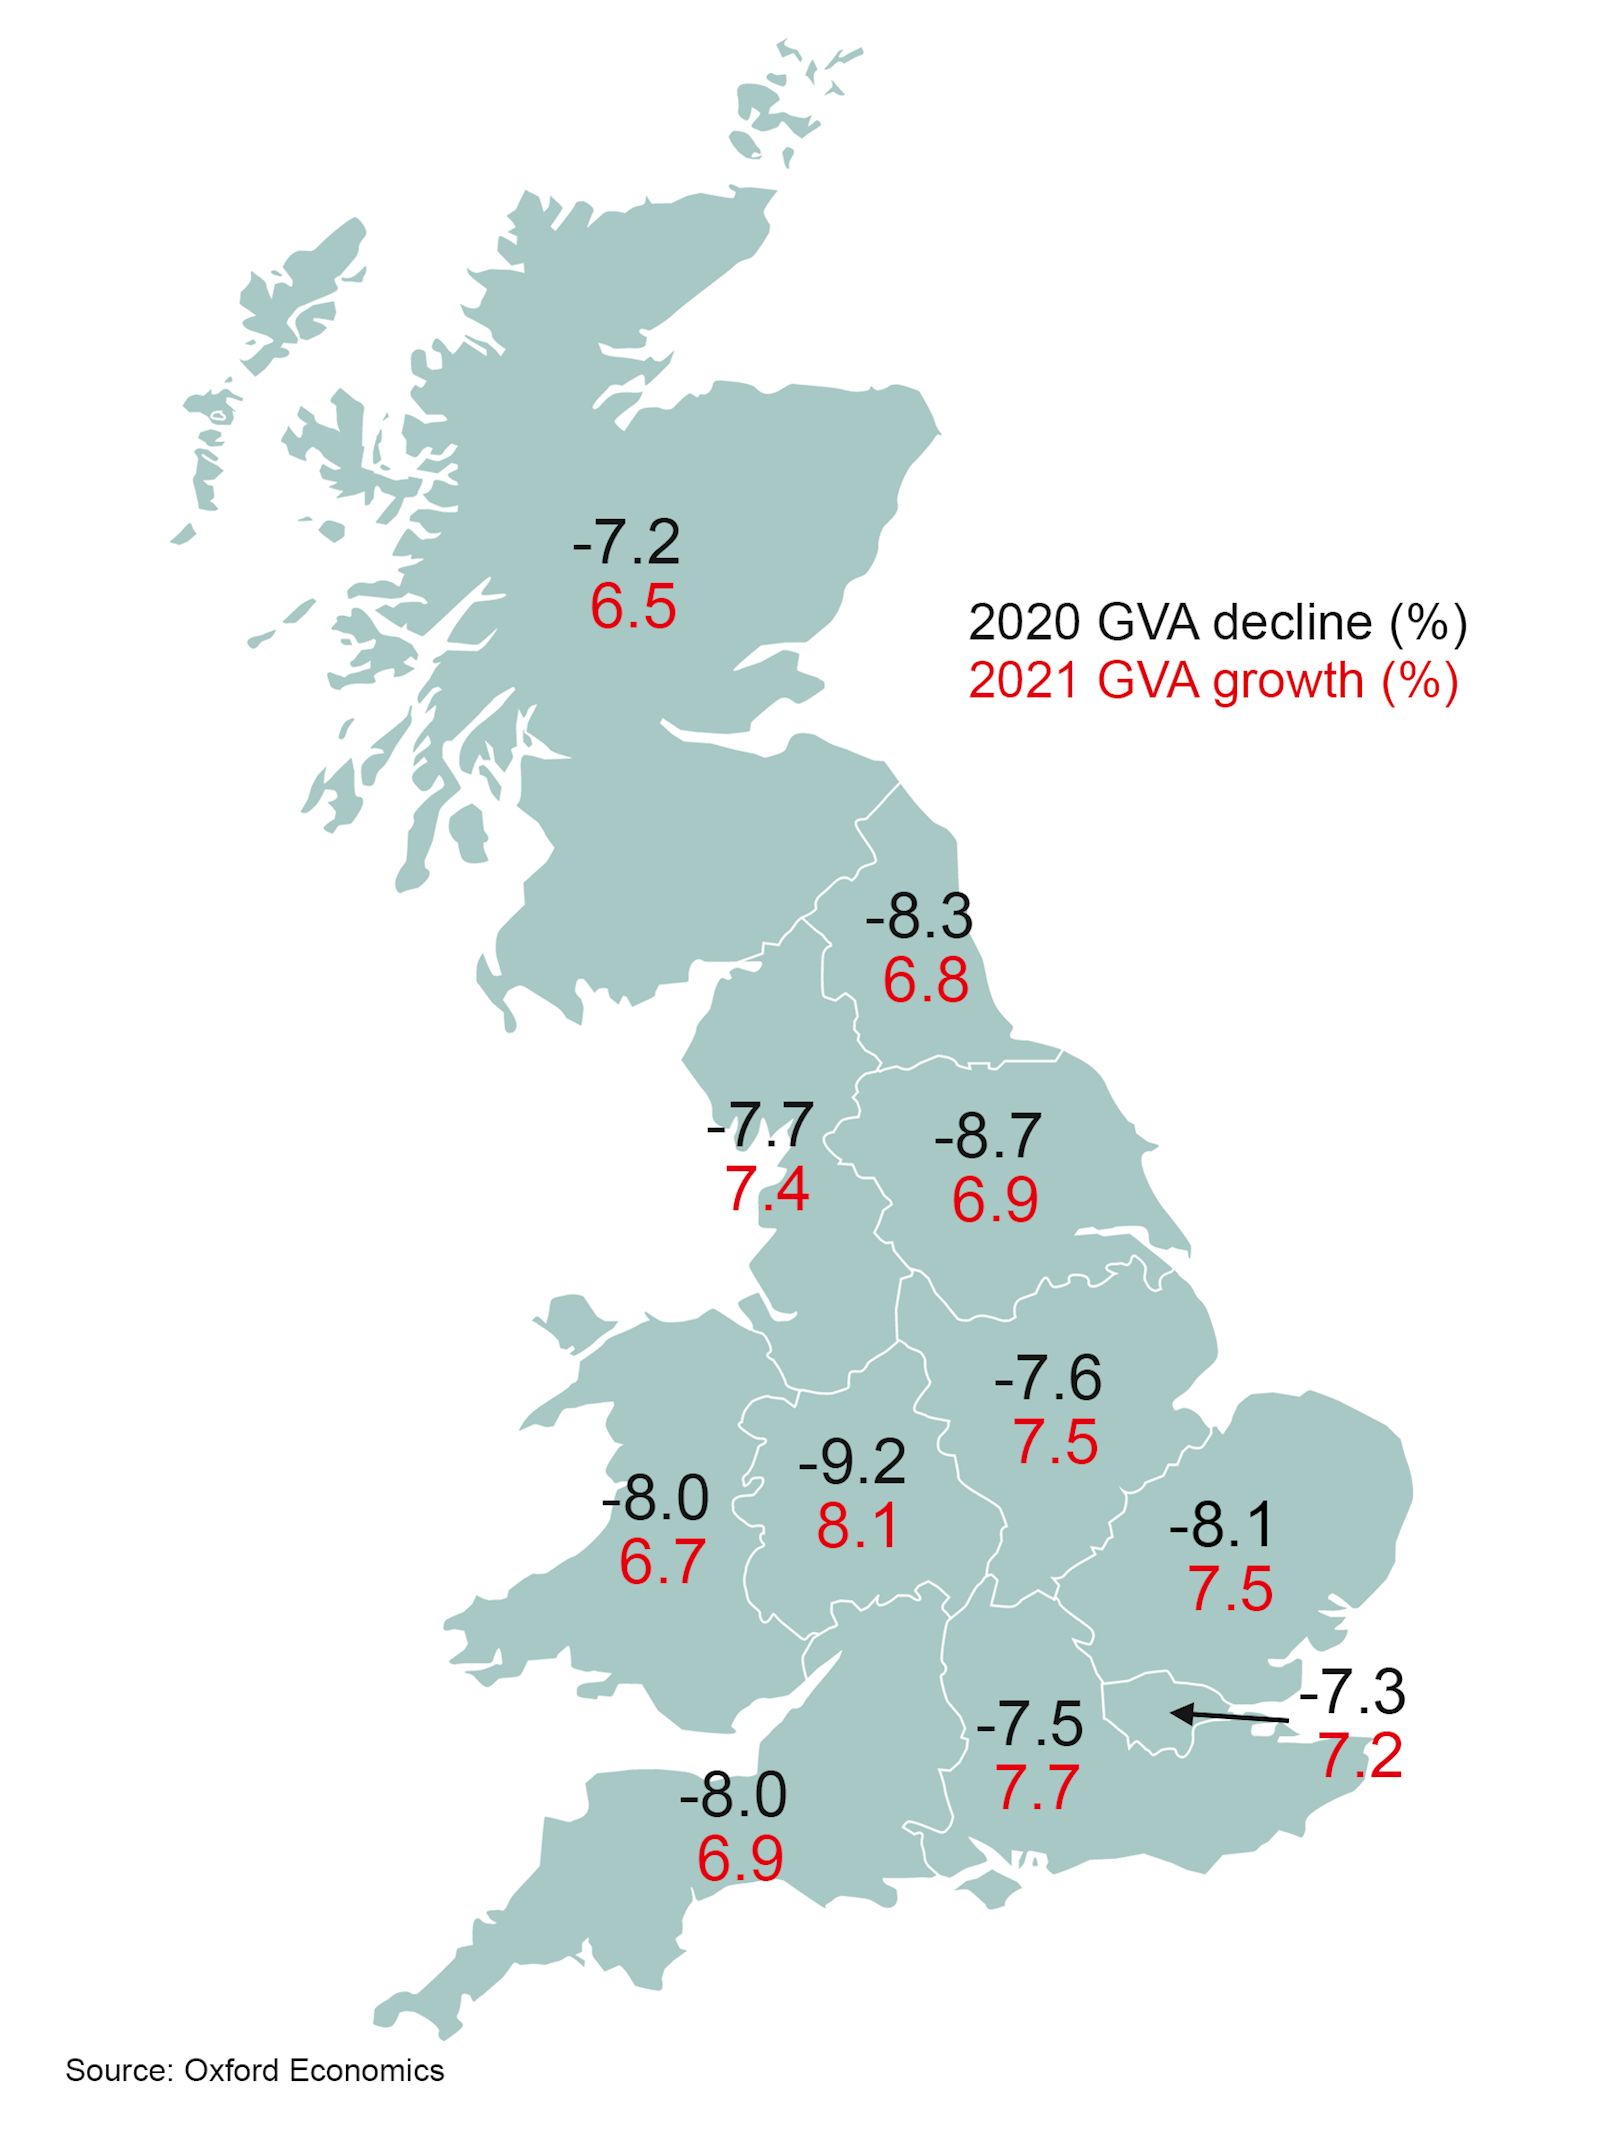 Map of UK with regional borders, showing 2020 GVA decline and 2021 GVA growth for each region